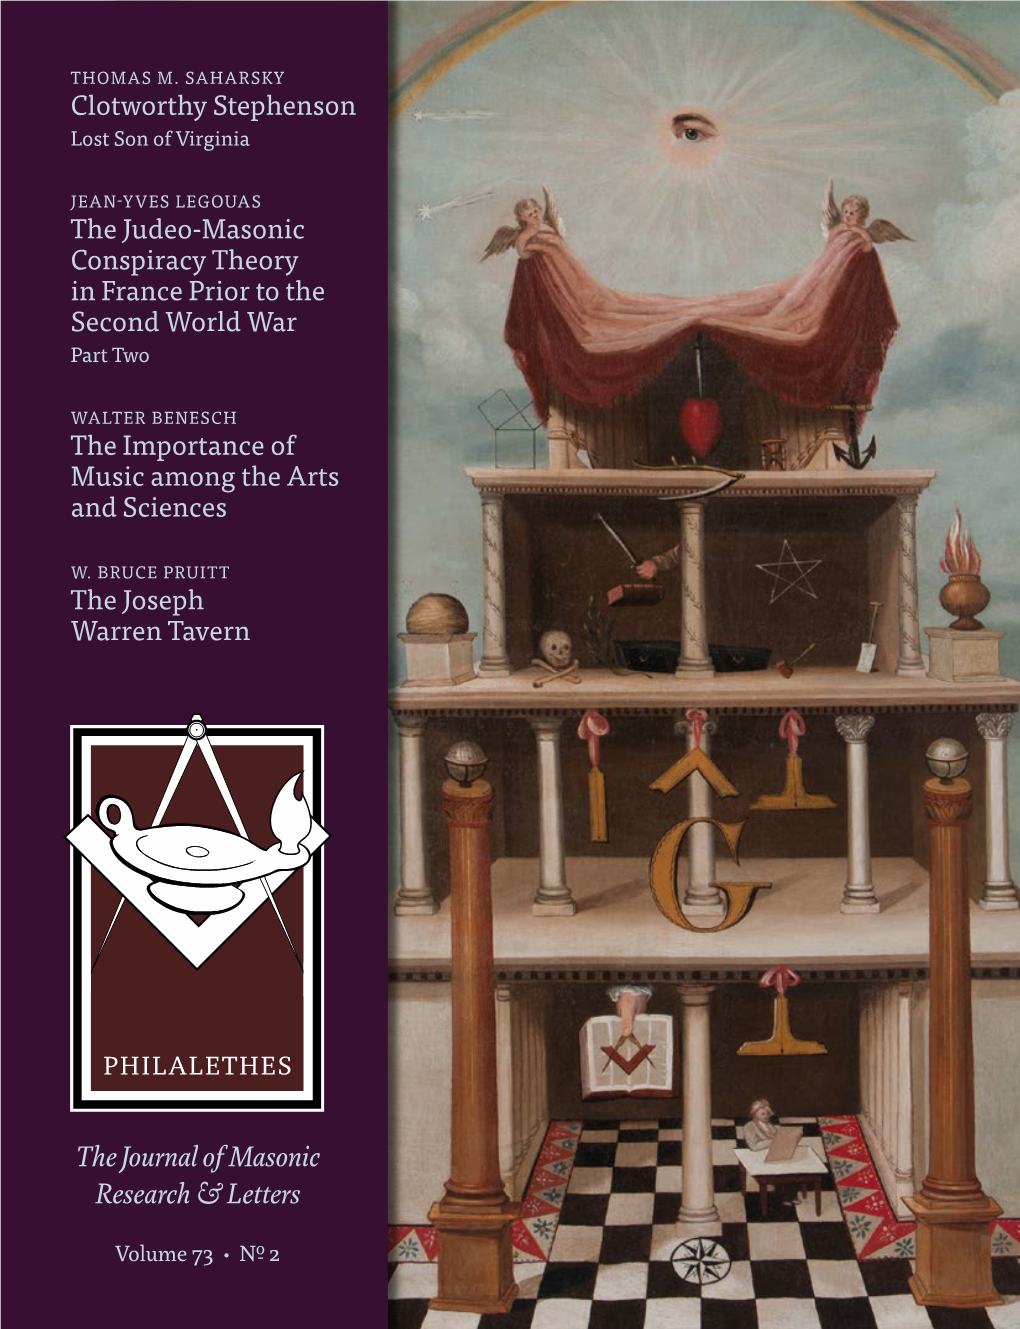 The Journal of Masonic Research & Letters